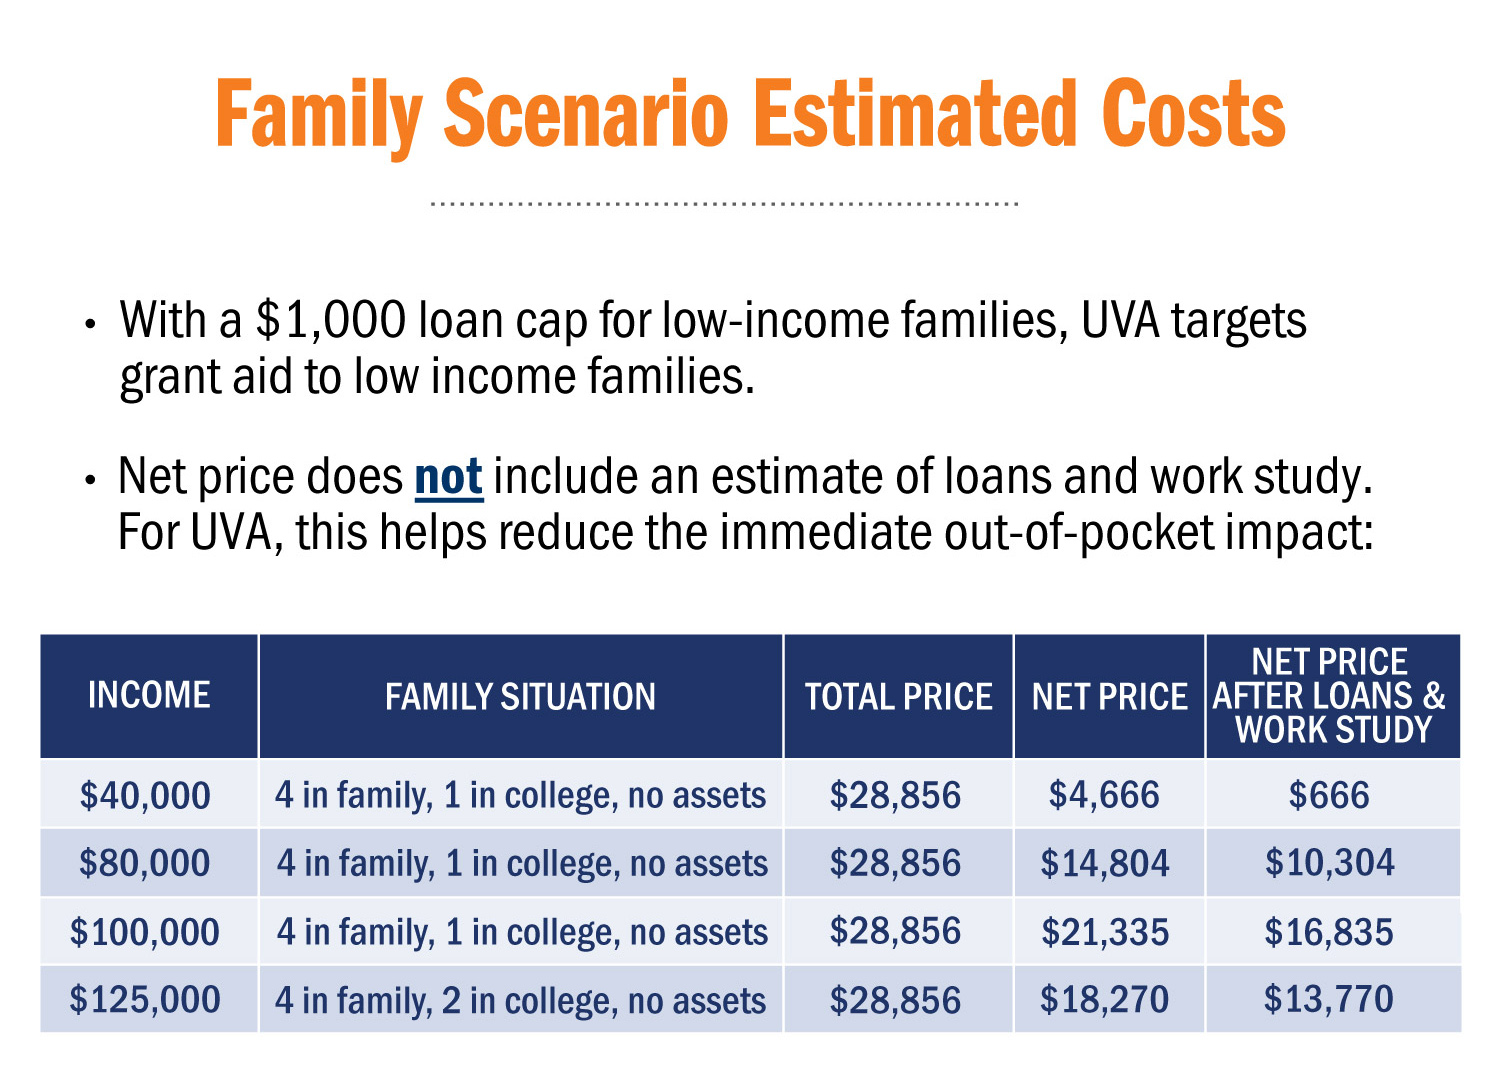 Text reads: Family Scenario Estimated Costs. With a 1000 loan cap for low-income families, UVA targets grant aid to low income families.  Net price does not include an estimate of loans and work study.  For UVA this helps reduce the immediate out-of-pocket impact.  Table shows income, family situation, total price, net price, and net price after loans& work study